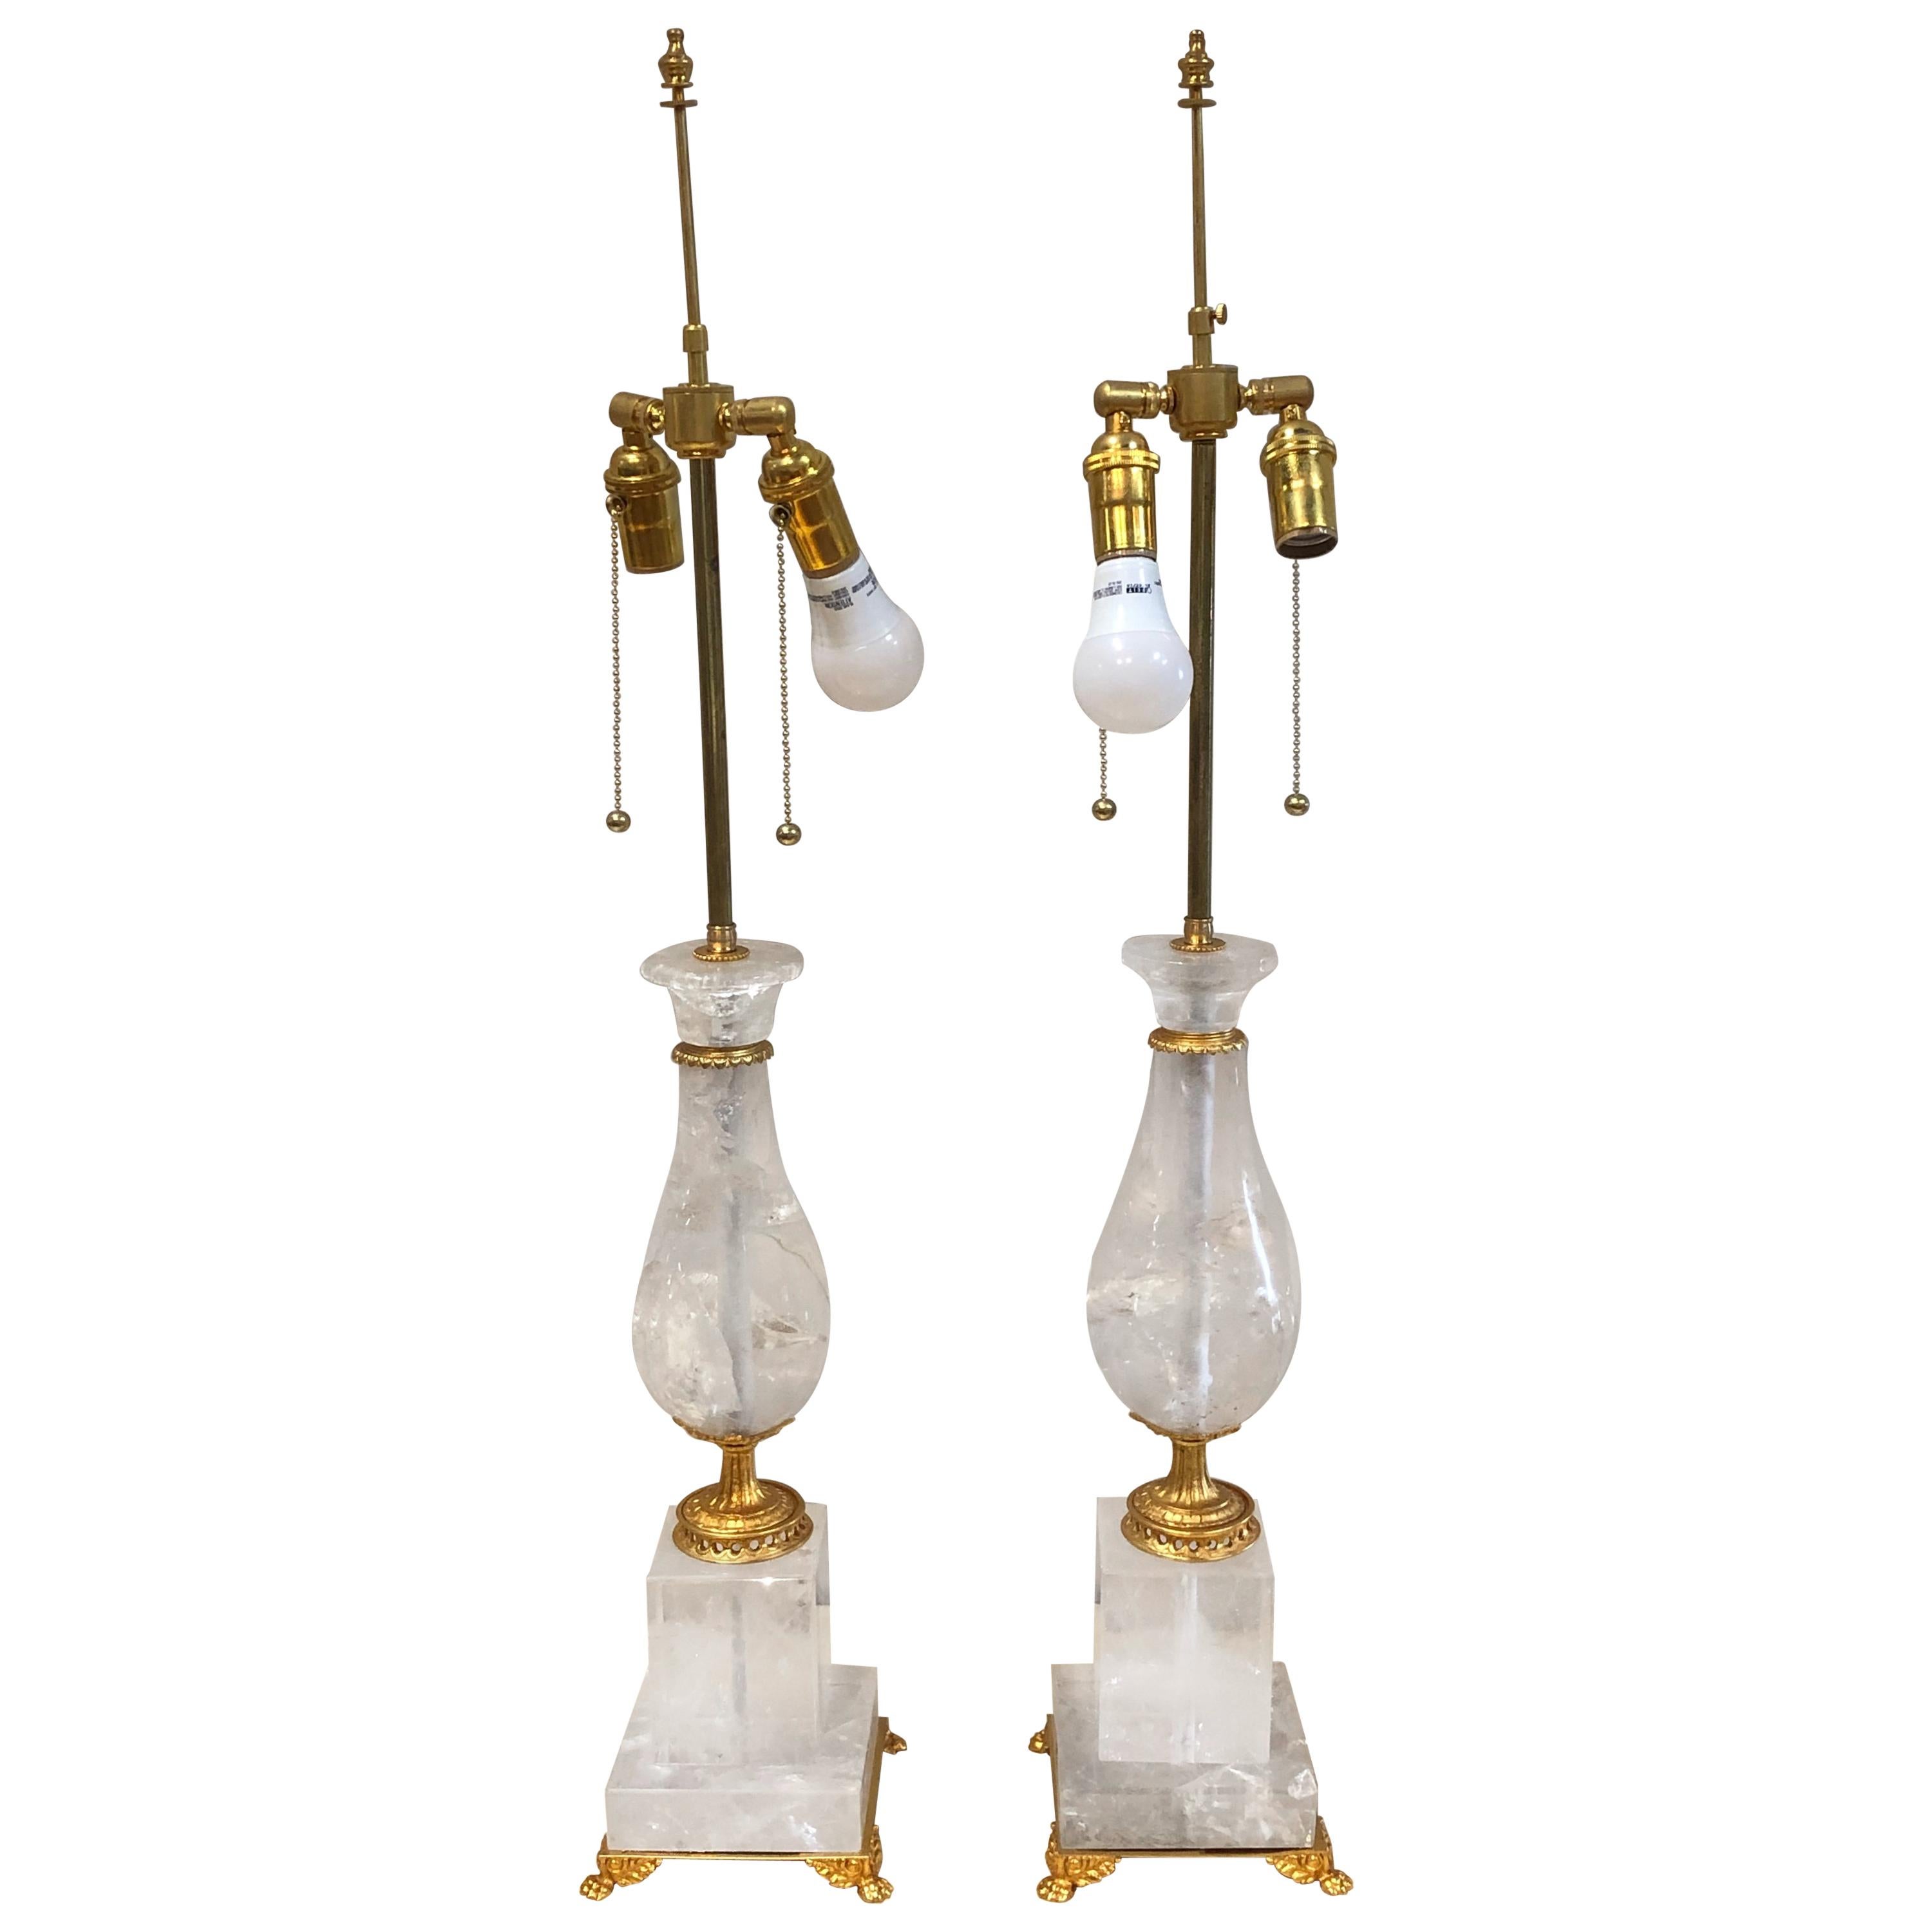 Pair of Art Deco Style Large Rock Crystal and Brass Urn on Base Form Table Lamps